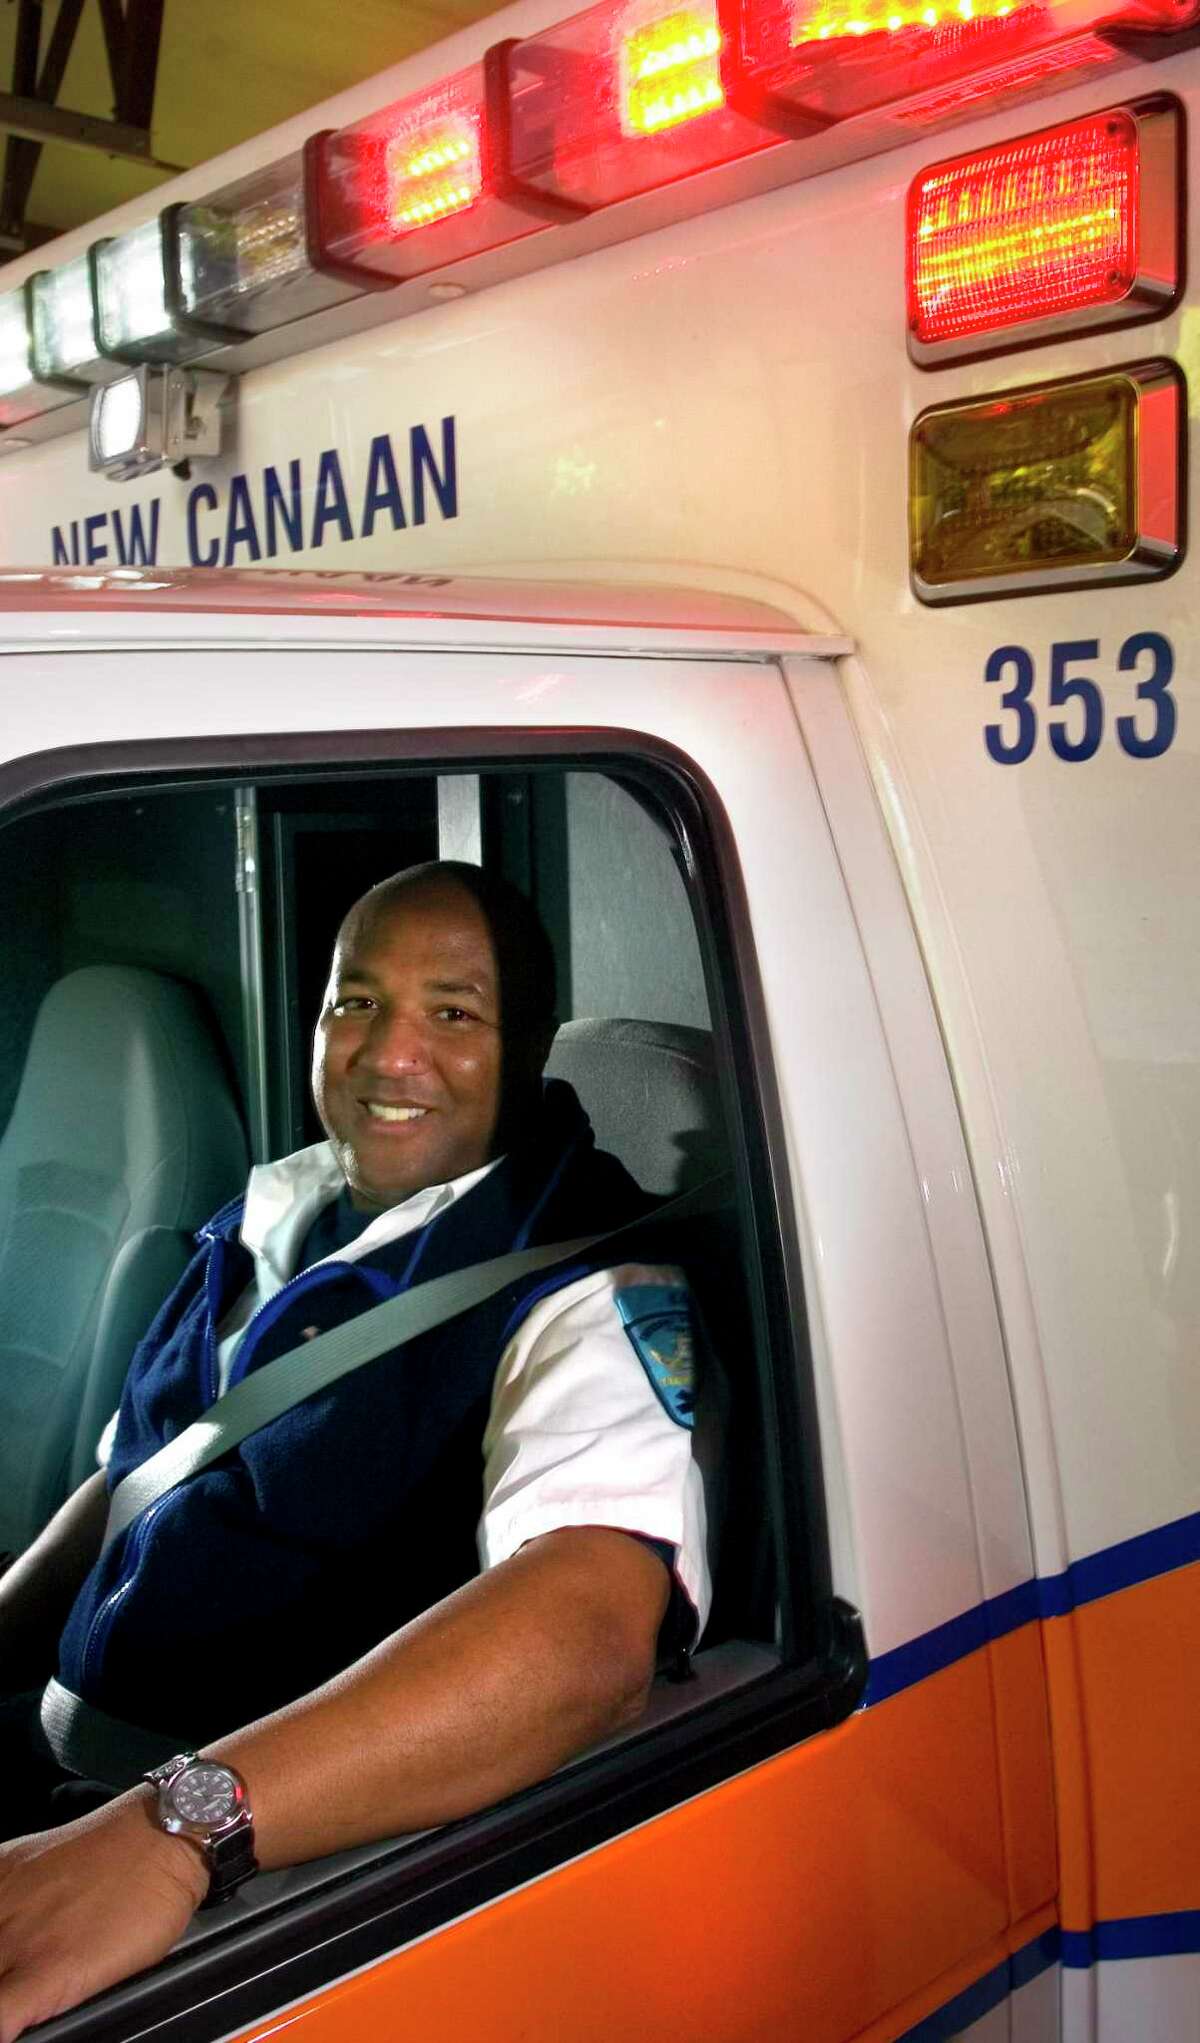 Pictured is New Canaan Emergency Medical Services and New Canaan Volunteer Ambulance Corp member Troy Haynie in one of the organizations’ emergency vehicles, an ambulance. An open house will be held this coming Sunday, Sept, 15, 2019 from 11 a.m. to 1 p.m. at their building, which is located at 182 South Ave. and very close to the center of town. Andrew Sullivan / Staff photo